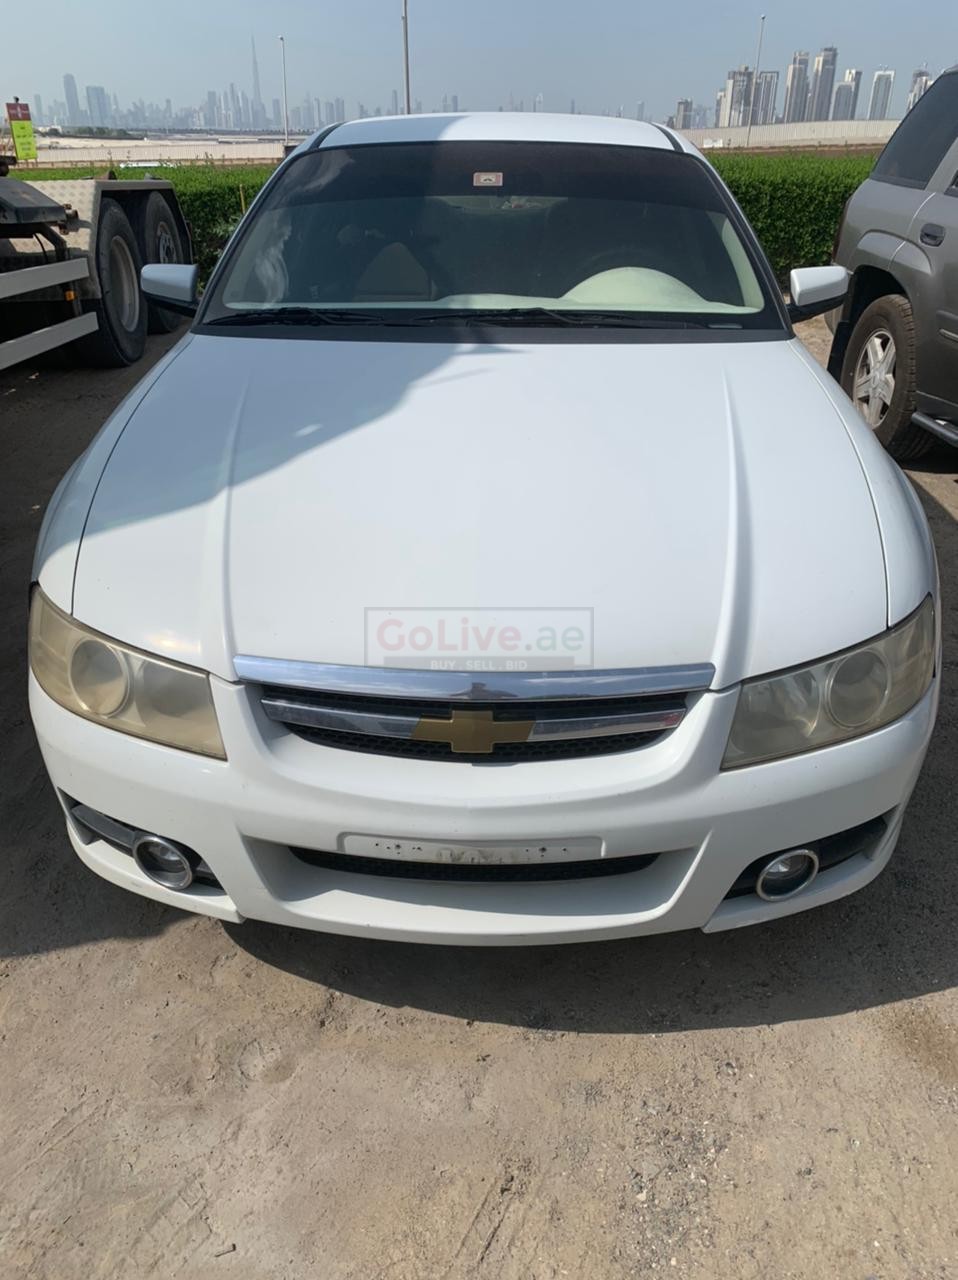 CHEVROLET LUMINA LTZ 2006,,WELL MAINTAINED,ACCIDENT FREE